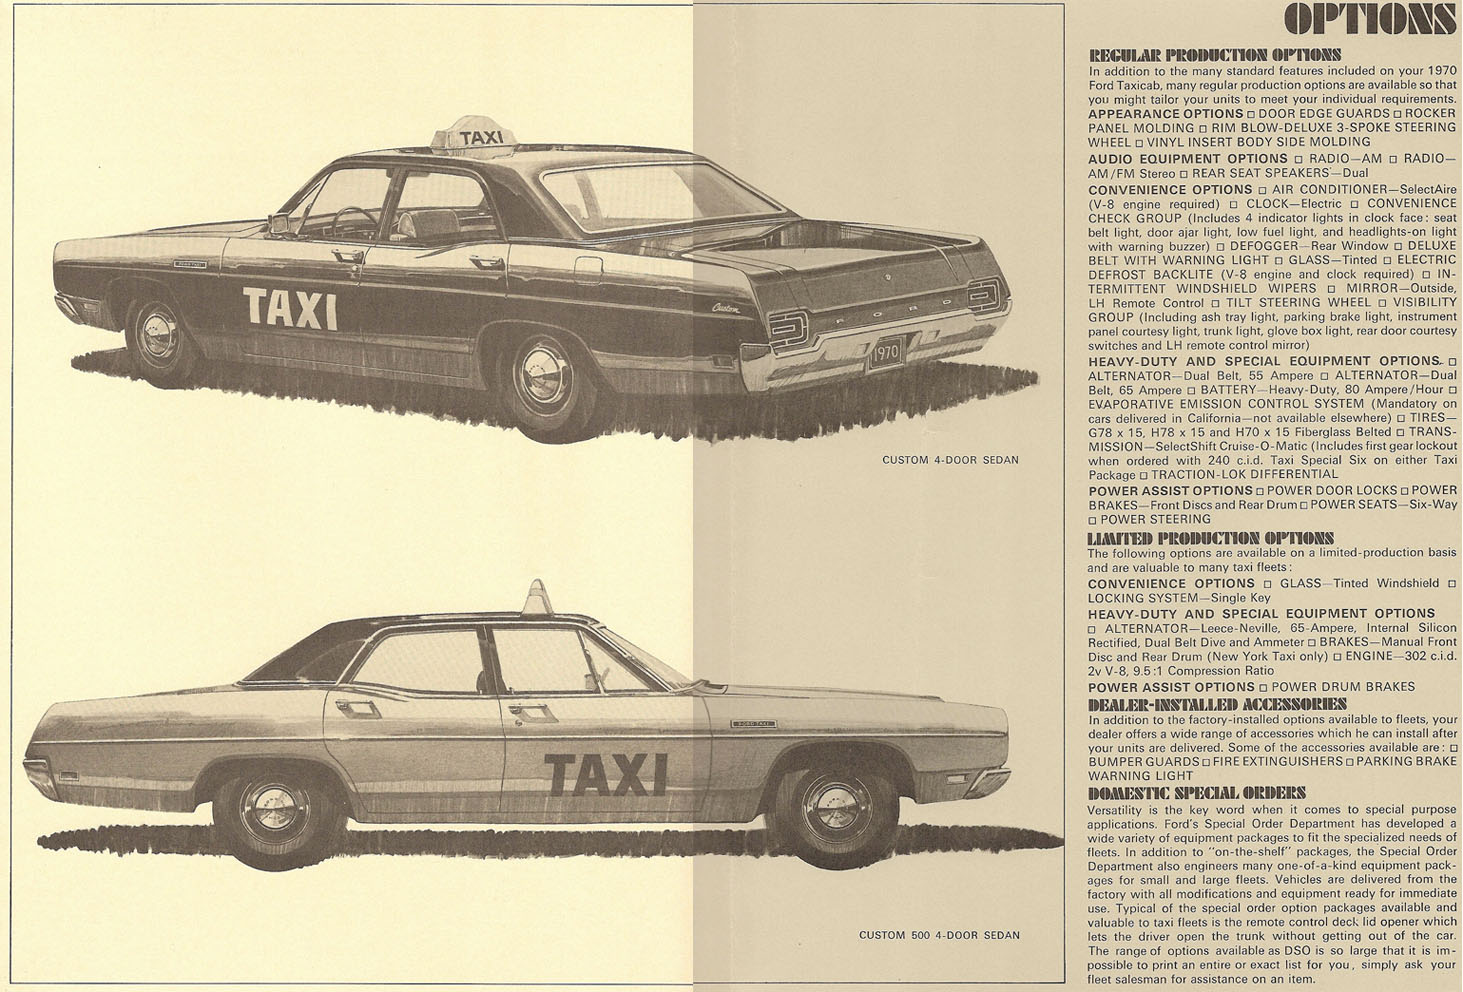 1970_Ford_Taxicabs-04-05